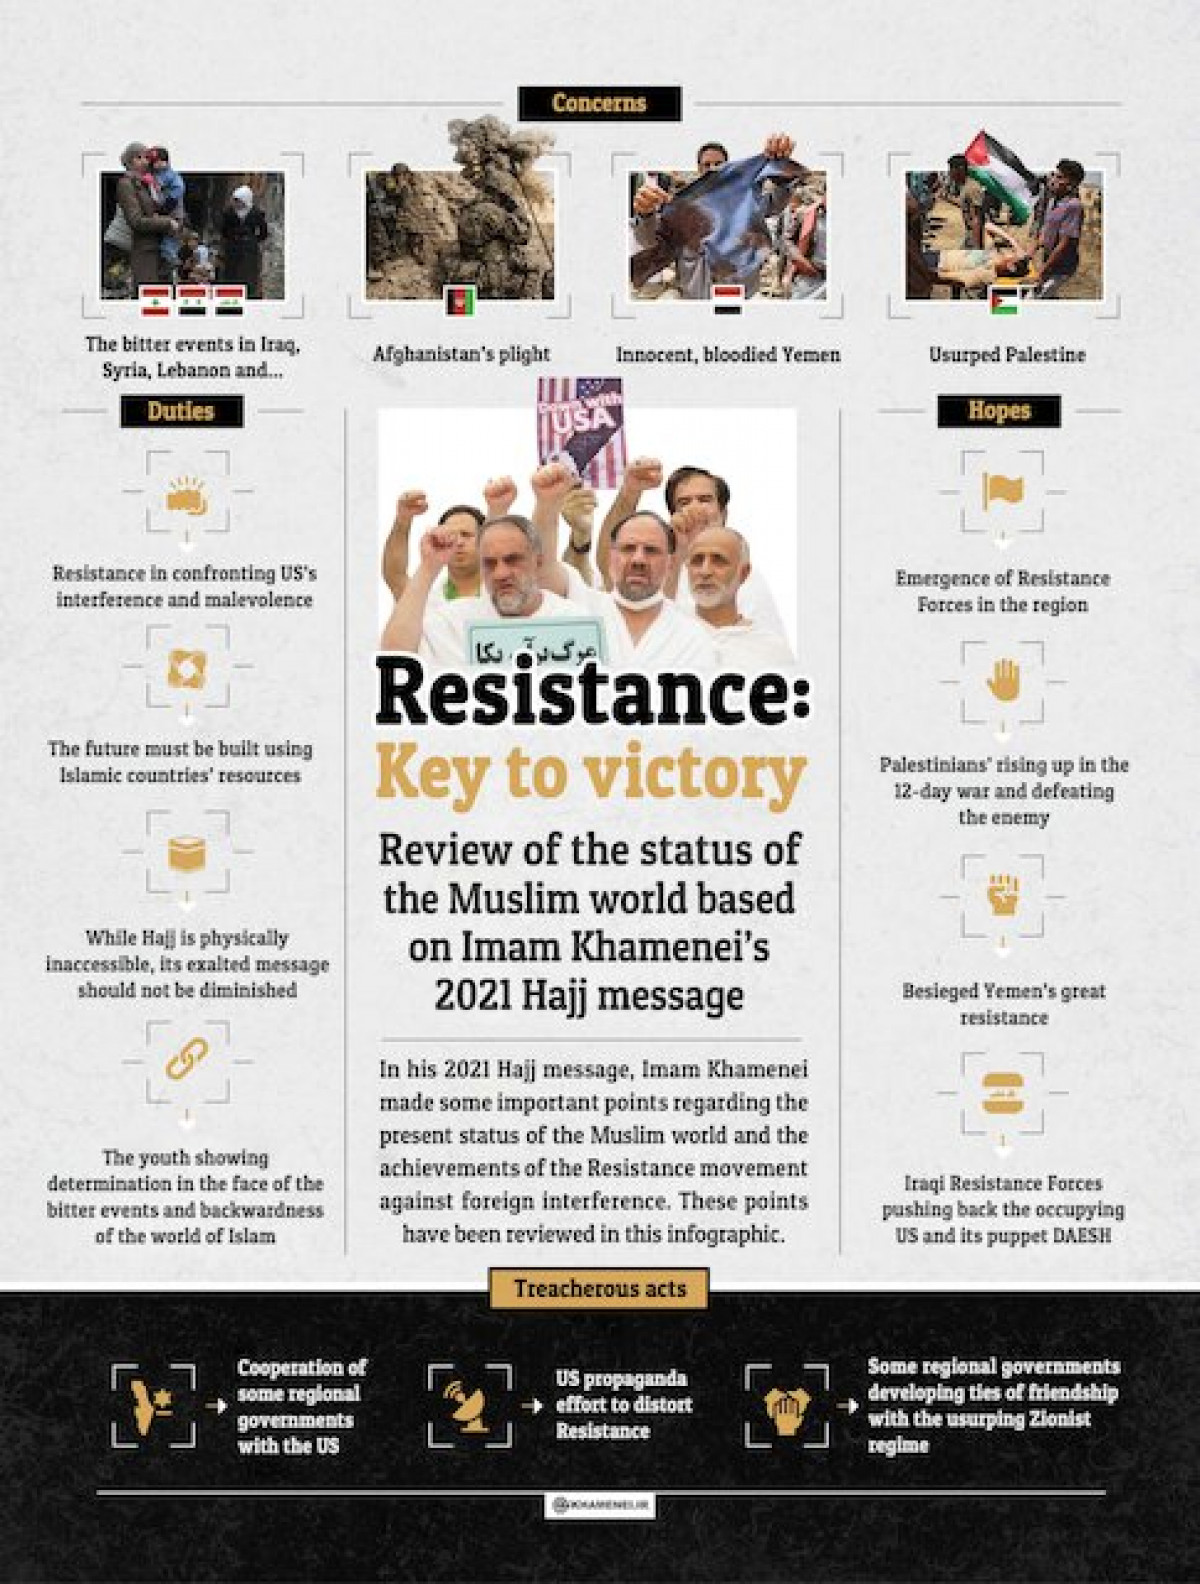 Resistance: Key to victory